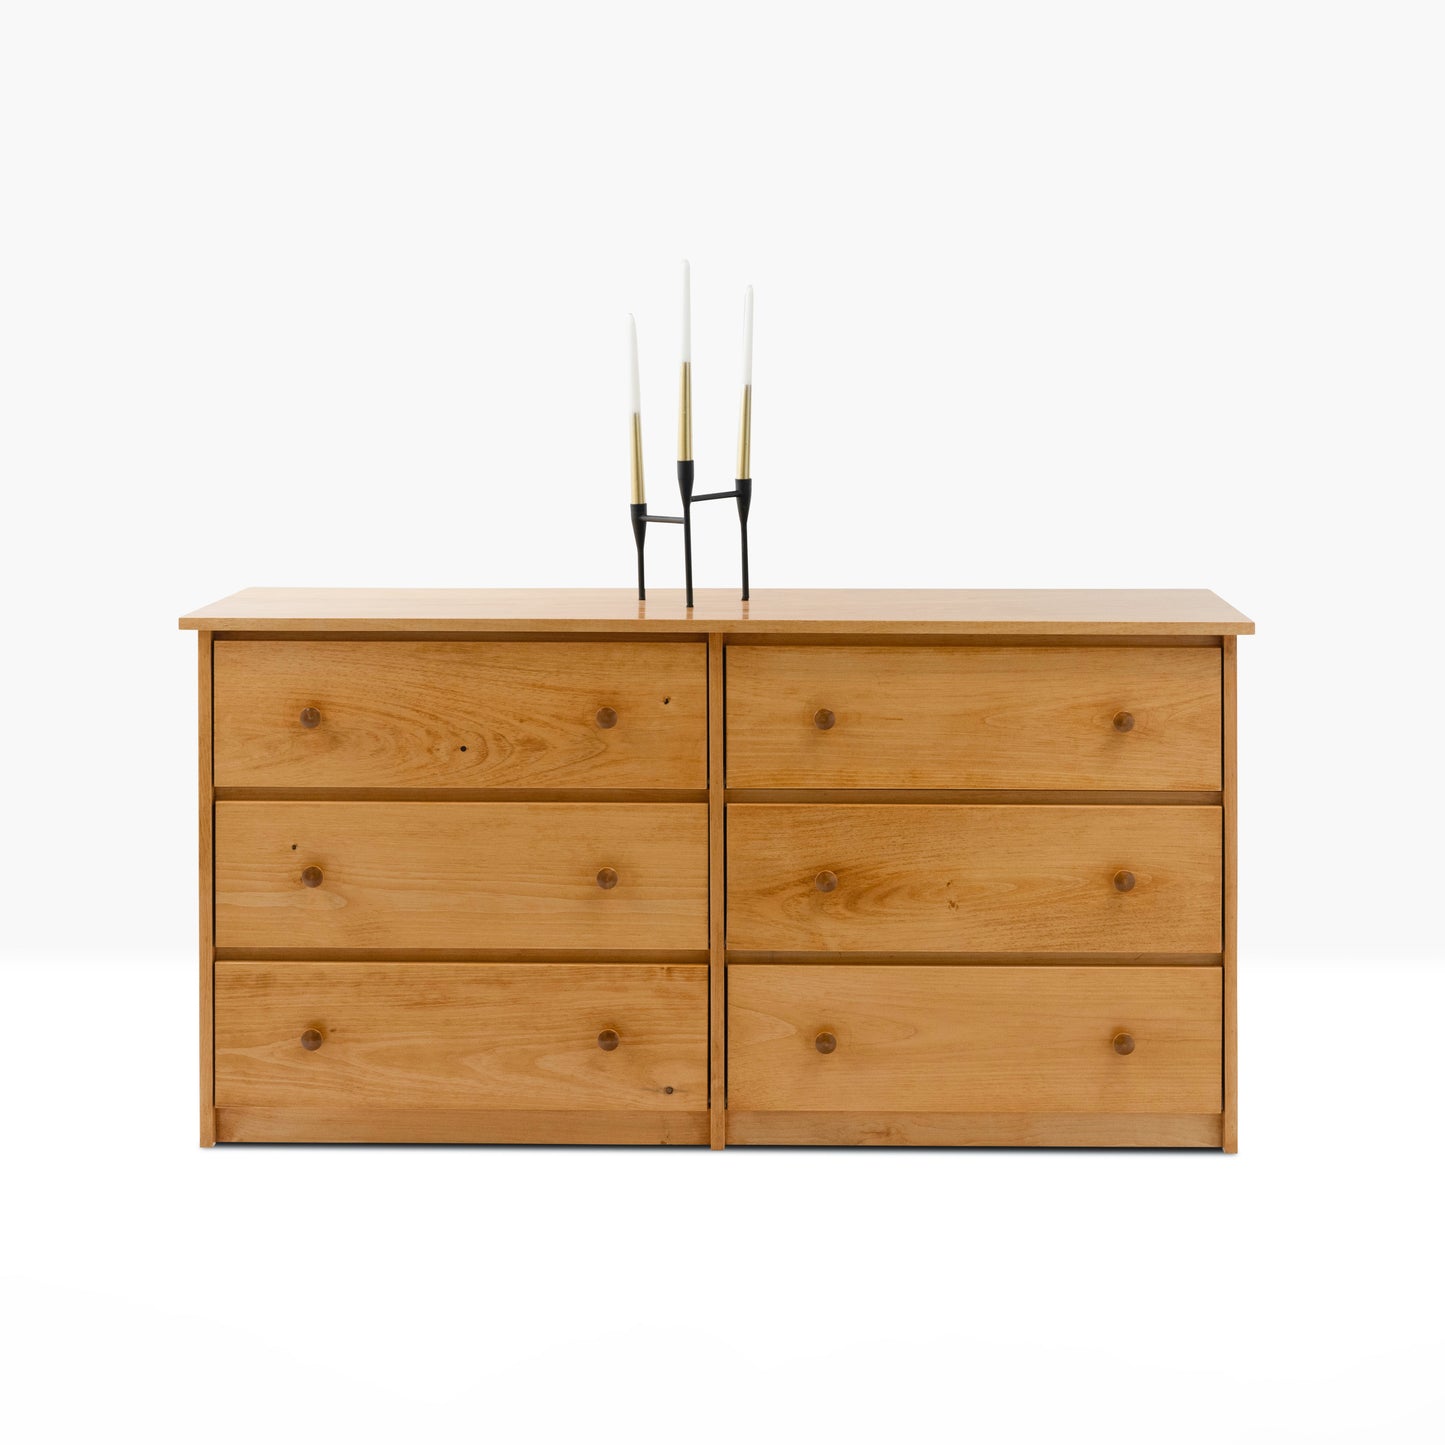 Evergreen Dresser is constructed from pine and birch, and features six drawers.  Shown in Golden Oak finish.